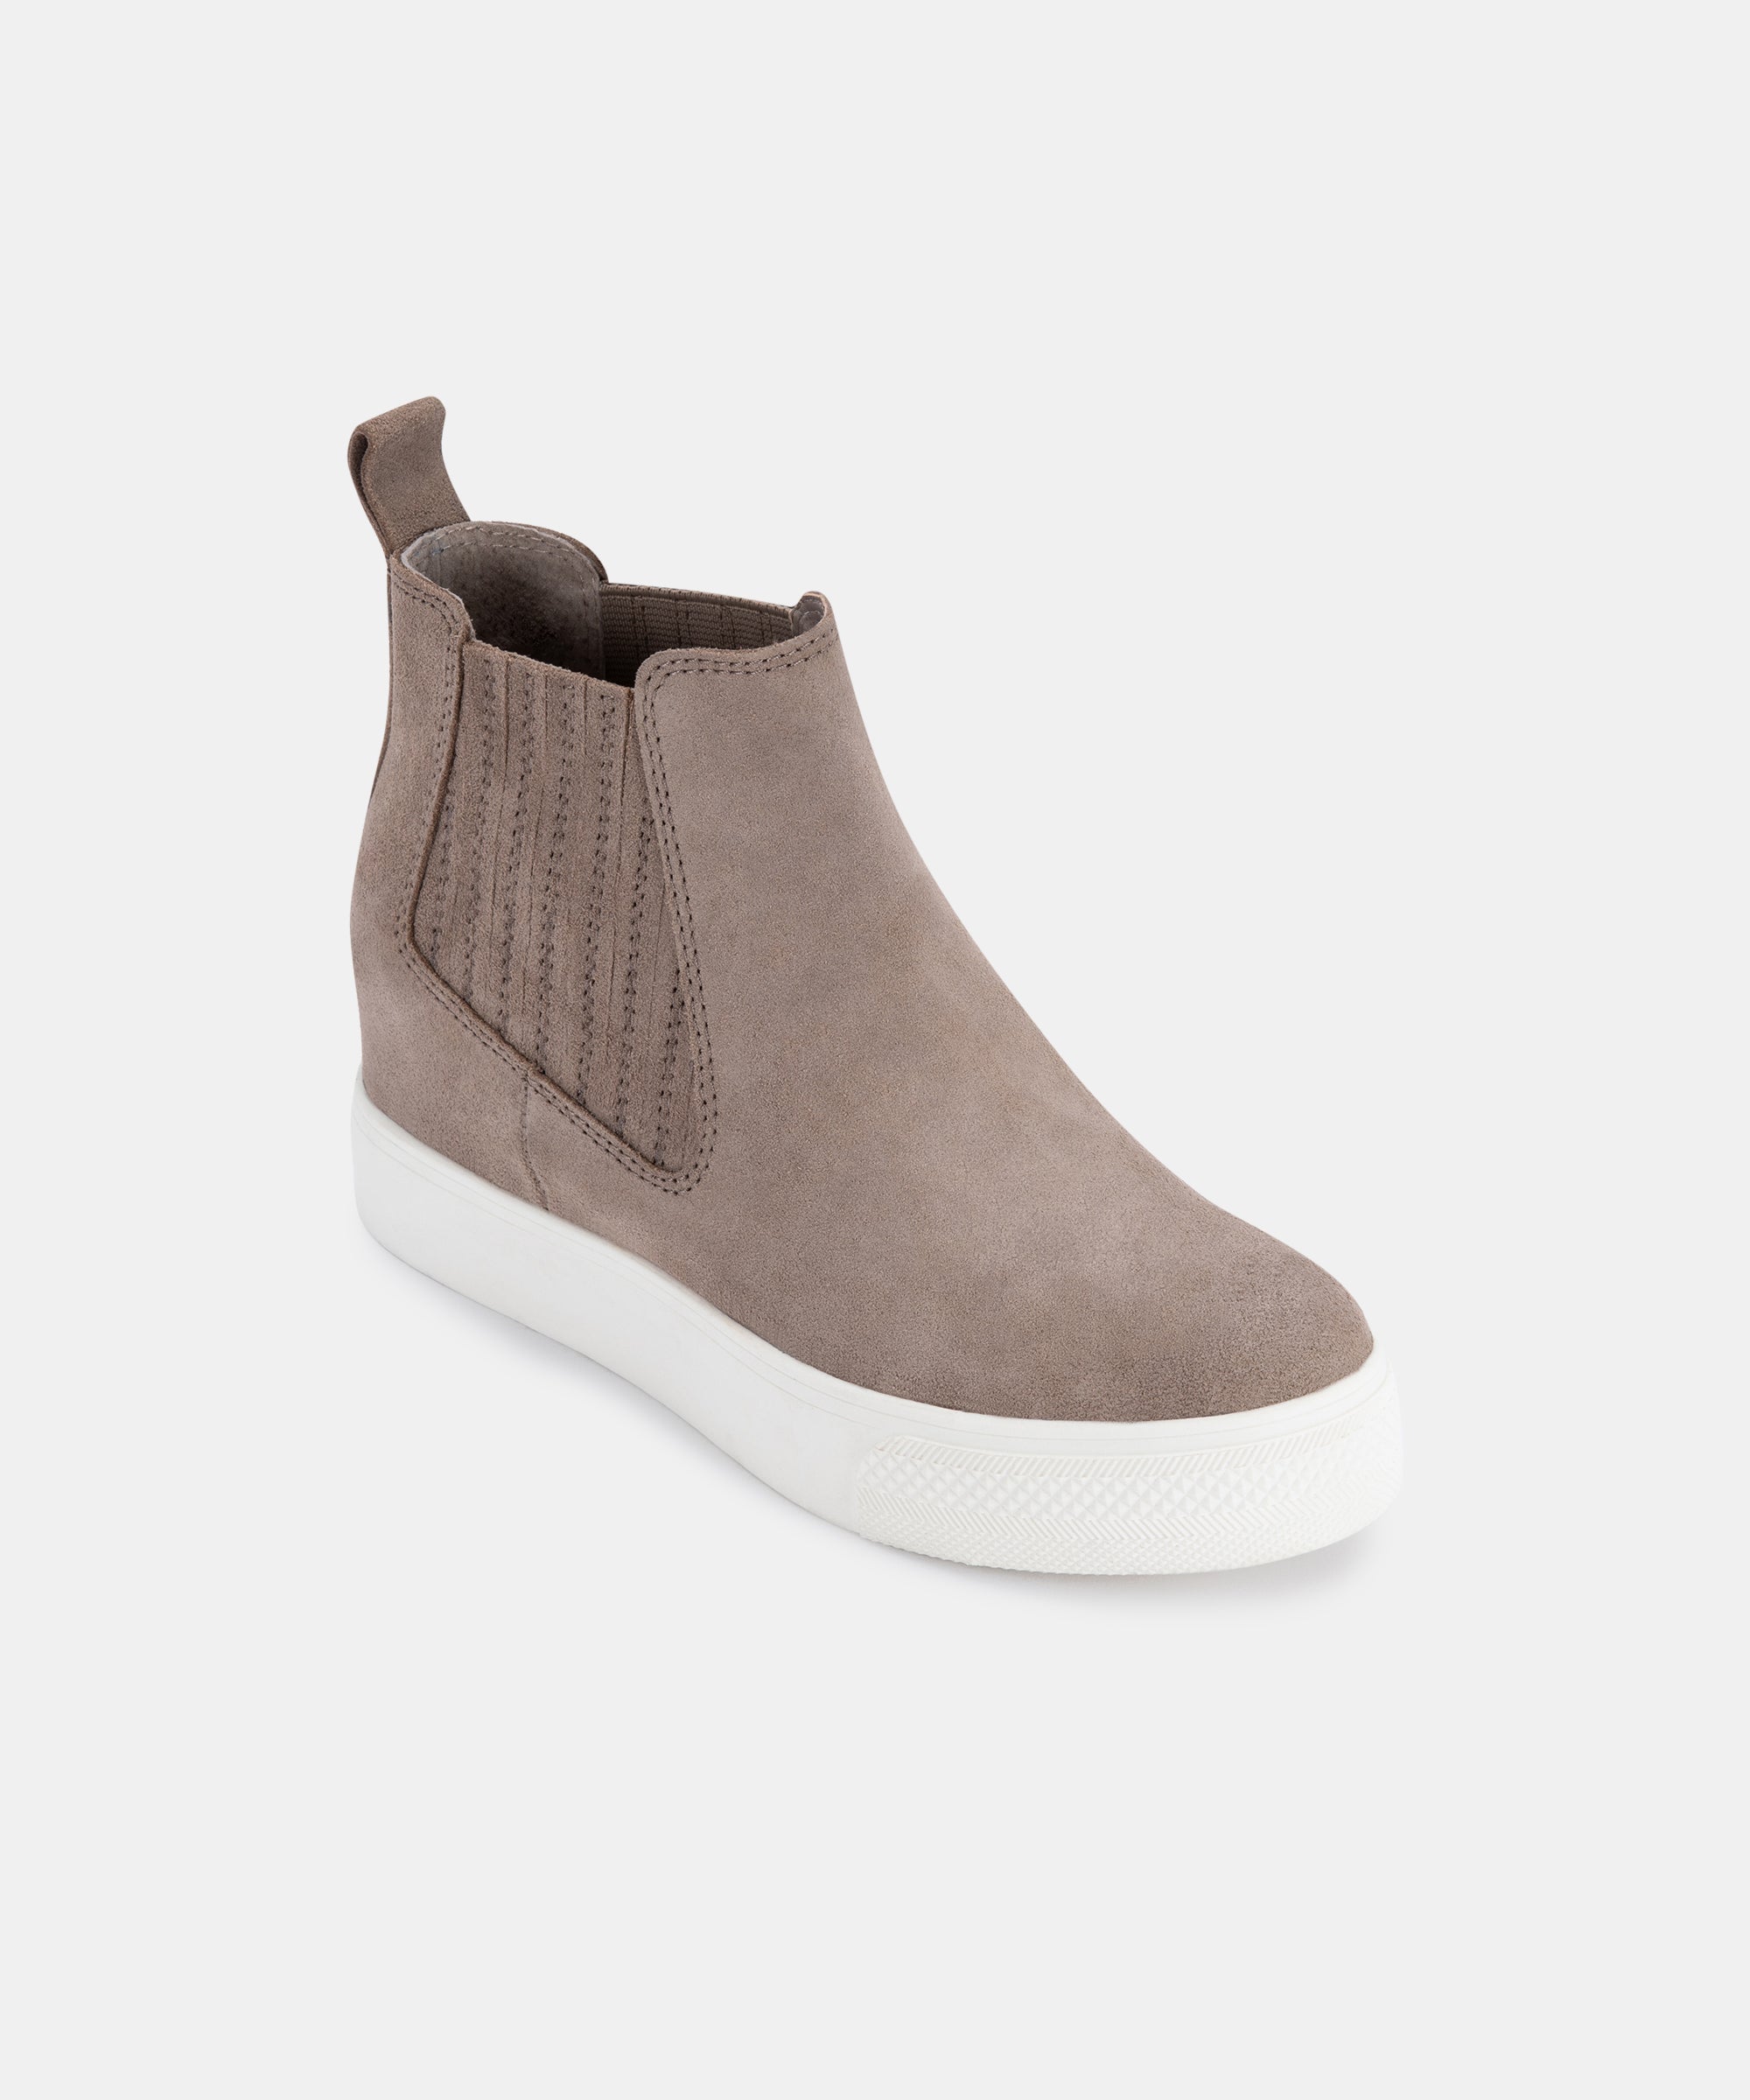 WYND SNEAKERS DK TAUPE SUEDE – Dolce Vita